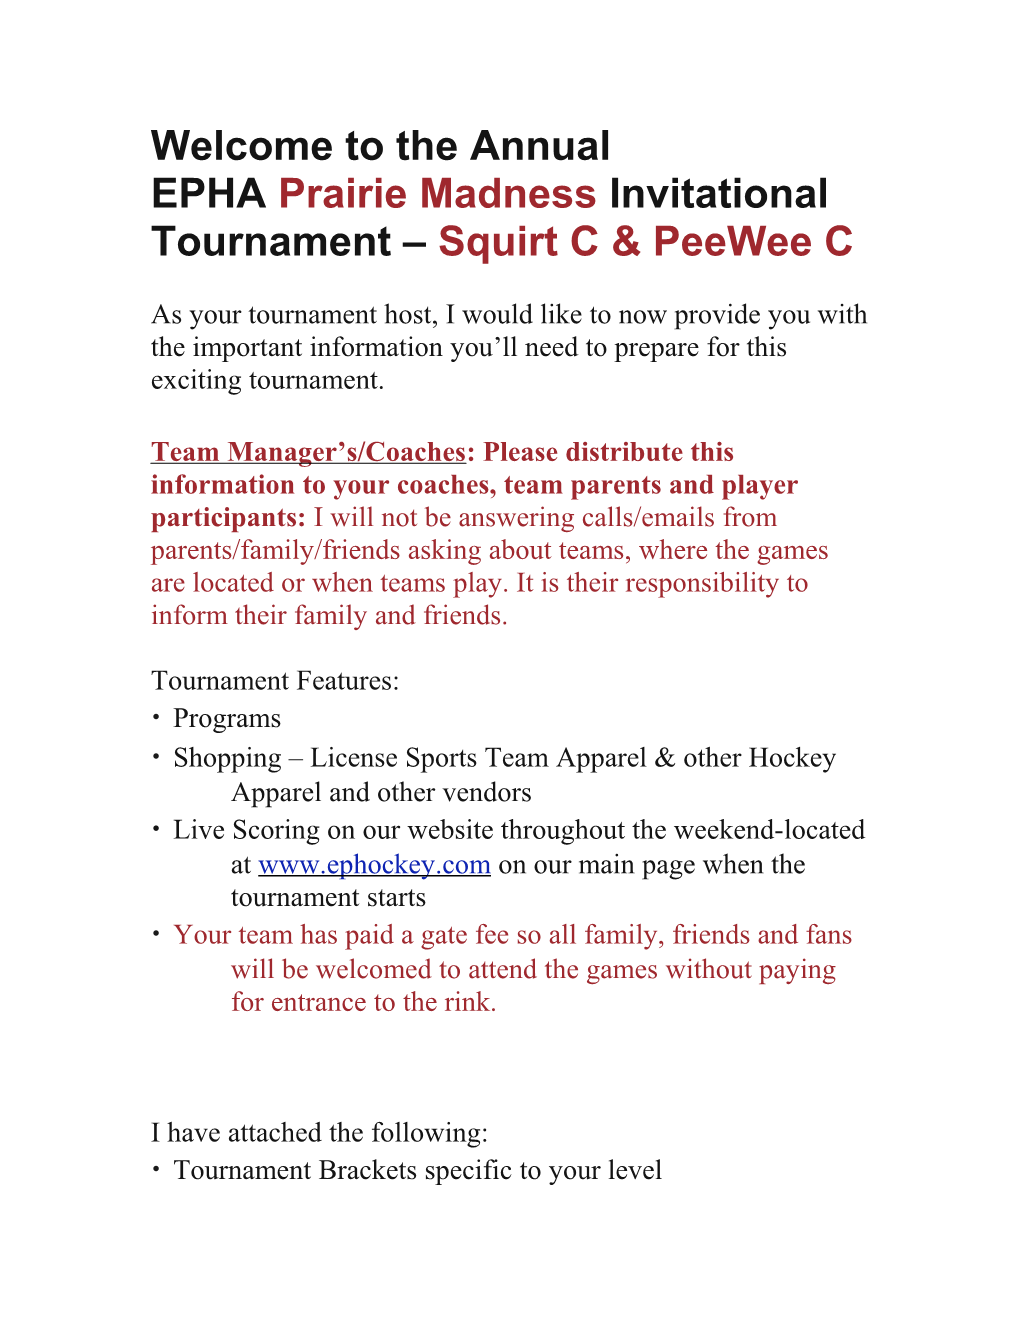 Welcome to the Annual Ephaprairie Madnessinvitational Tournament Squirt C & Peewee C